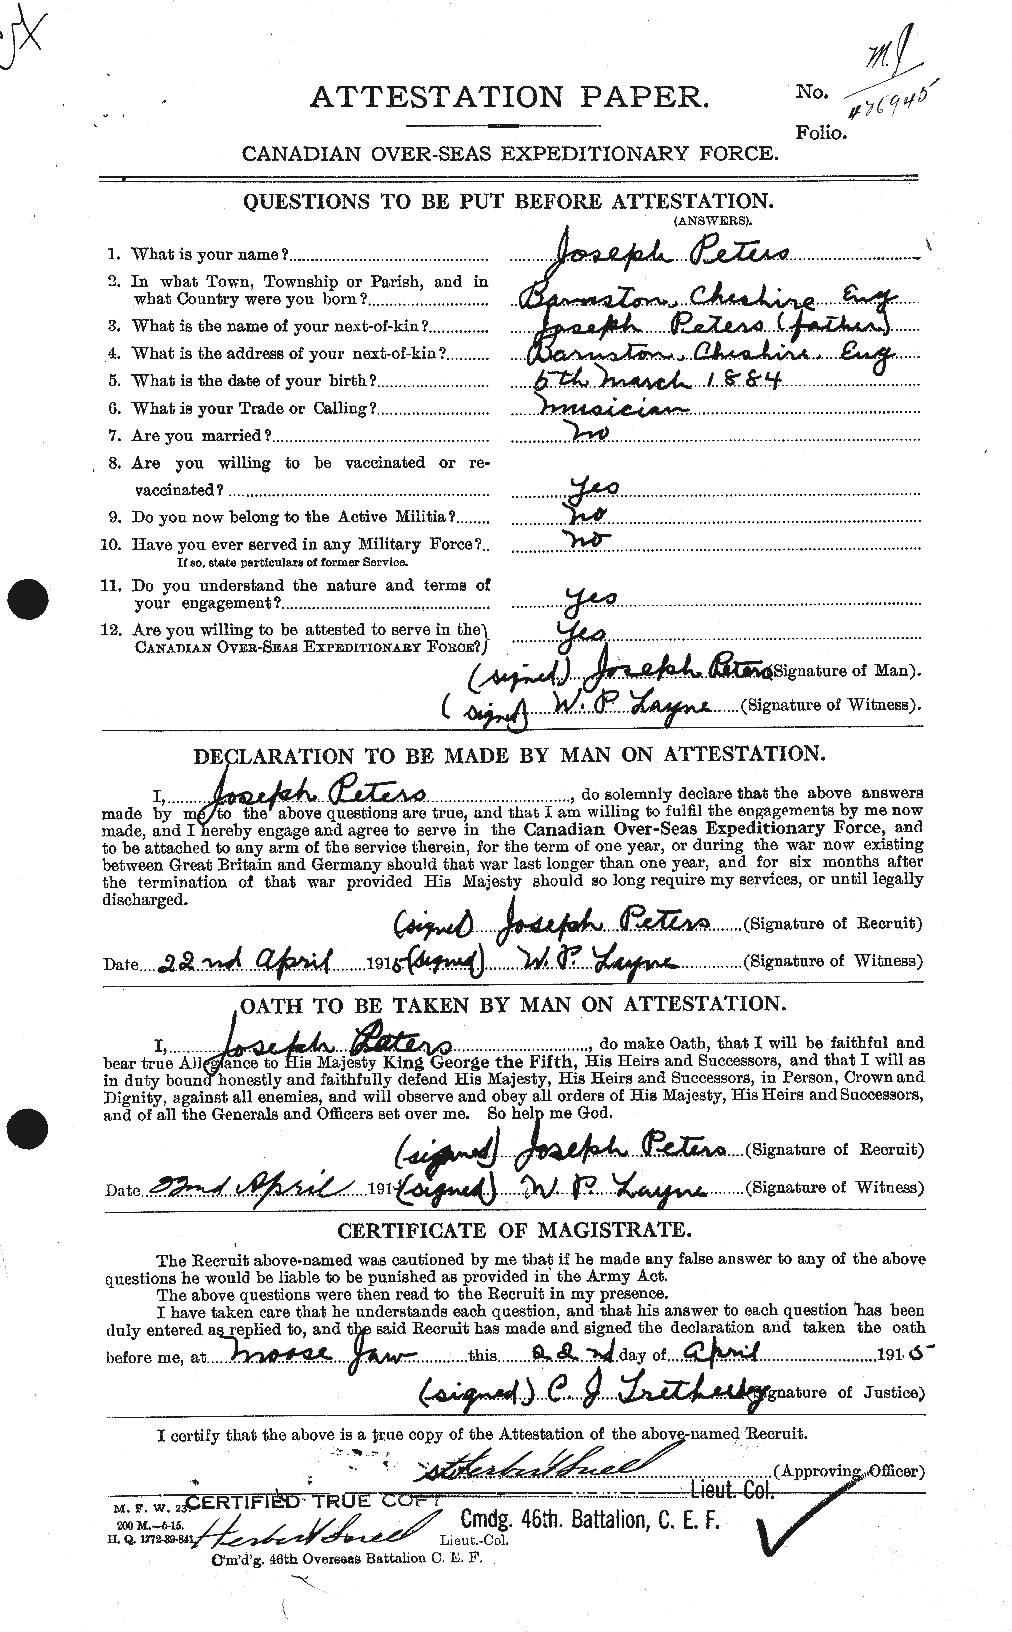 Personnel Records of the First World War - CEF 575554a